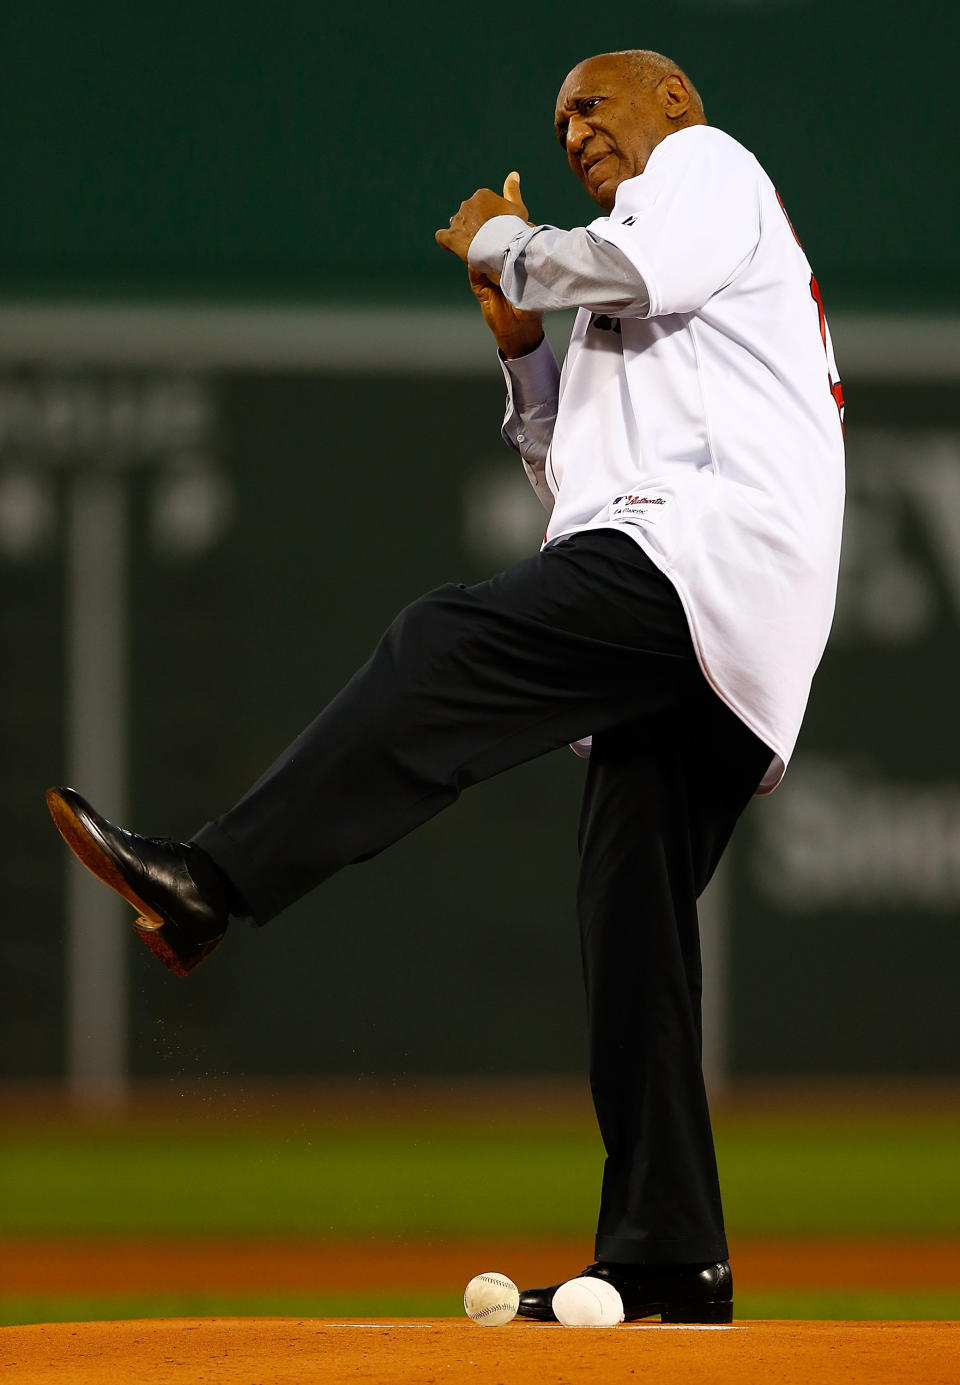 BOSTON, MA - SEPTEMBER 13:  Actor Bill Cosby throws out the first pitch prior to the game between the Boston Red Sox and the New York Yankees on September 13, 2012 at Fenway Park in Boston, Massachusetts.  (Photo by Jared Wickerham/Getty Images)